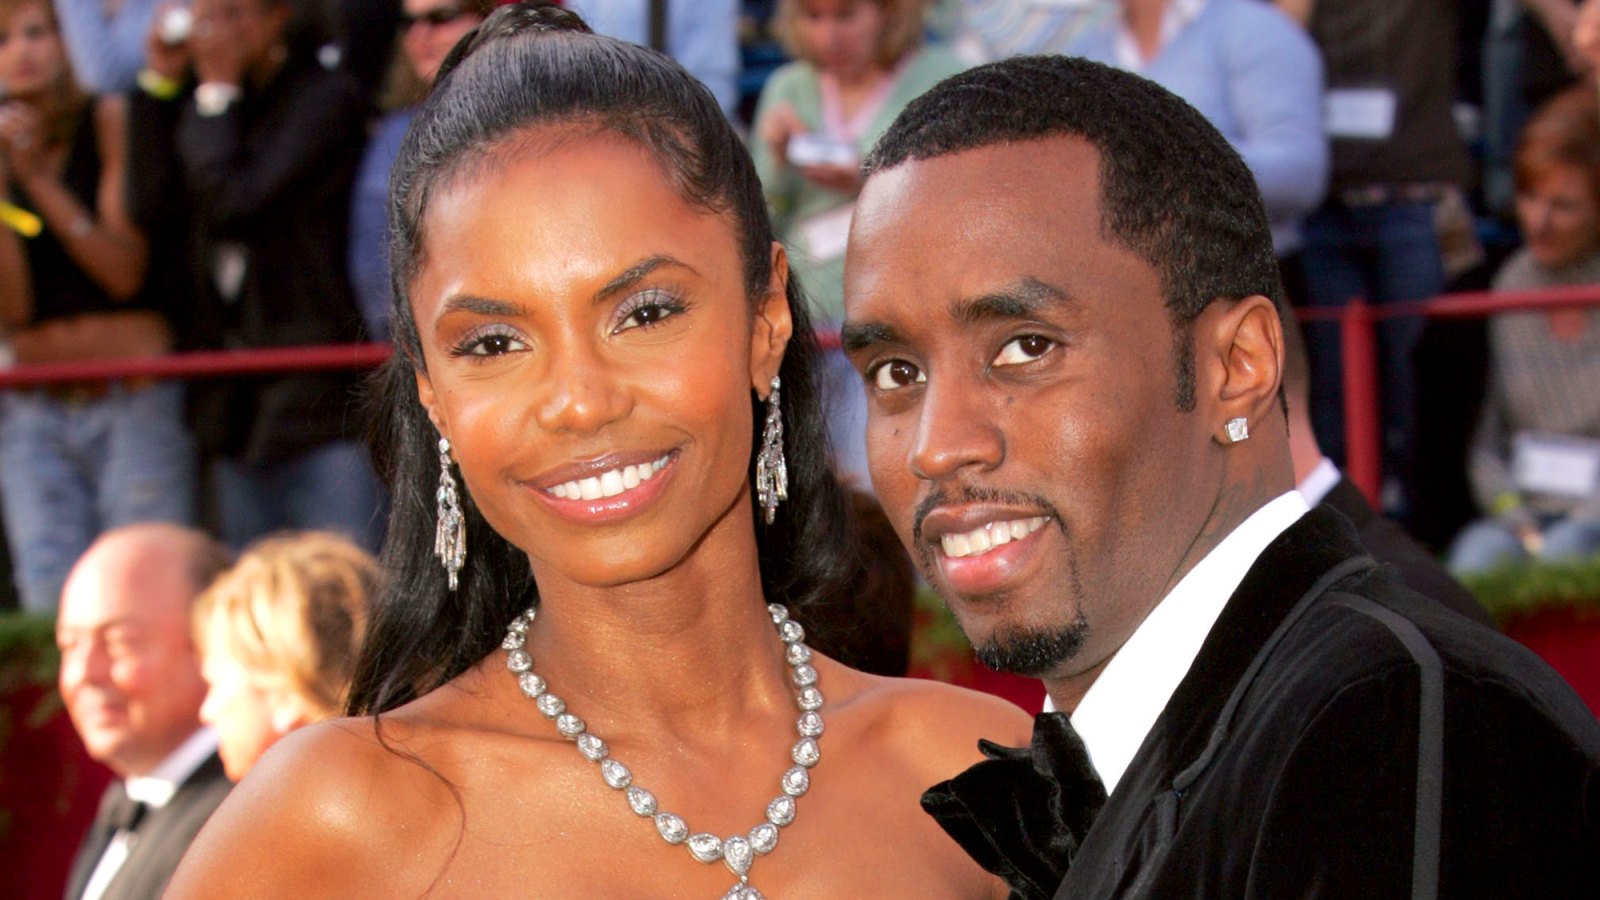 Kim Porter and Sean "P. Diddy" Combs